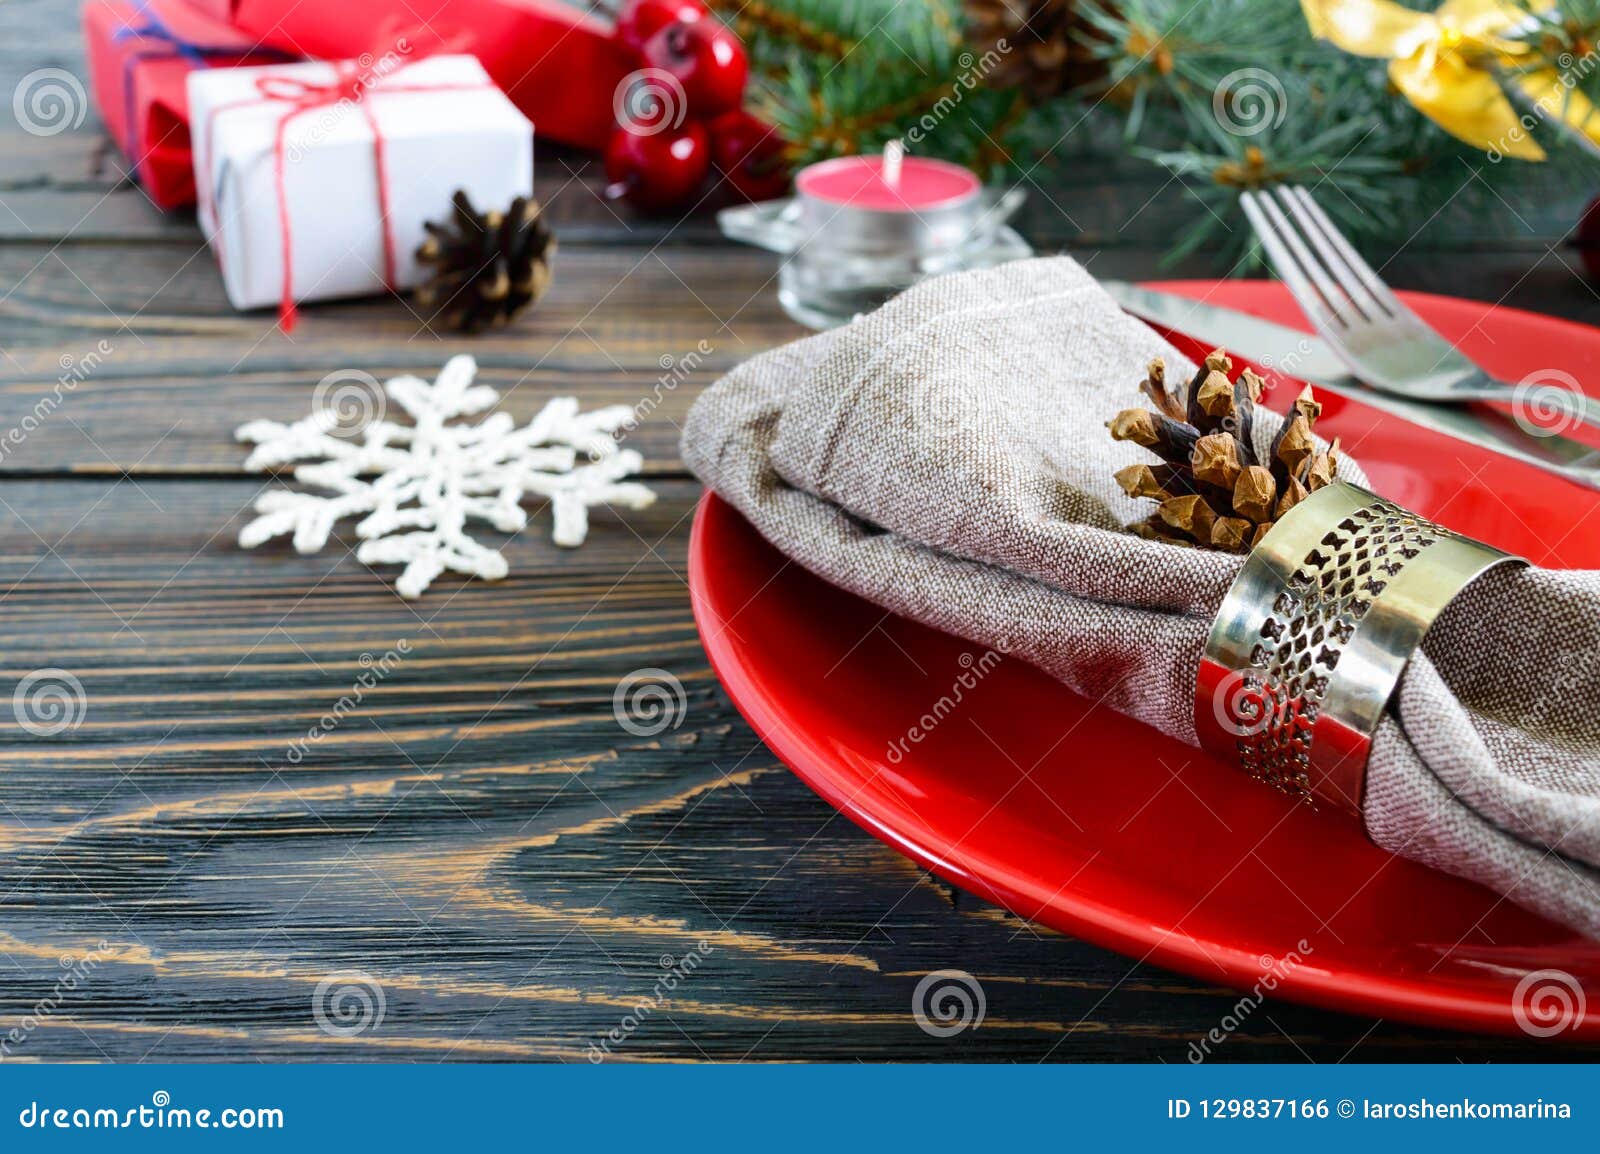 Christmas Table Setting. Red Plate, Fork, Knife, Candle, Napkin, Gifts ...